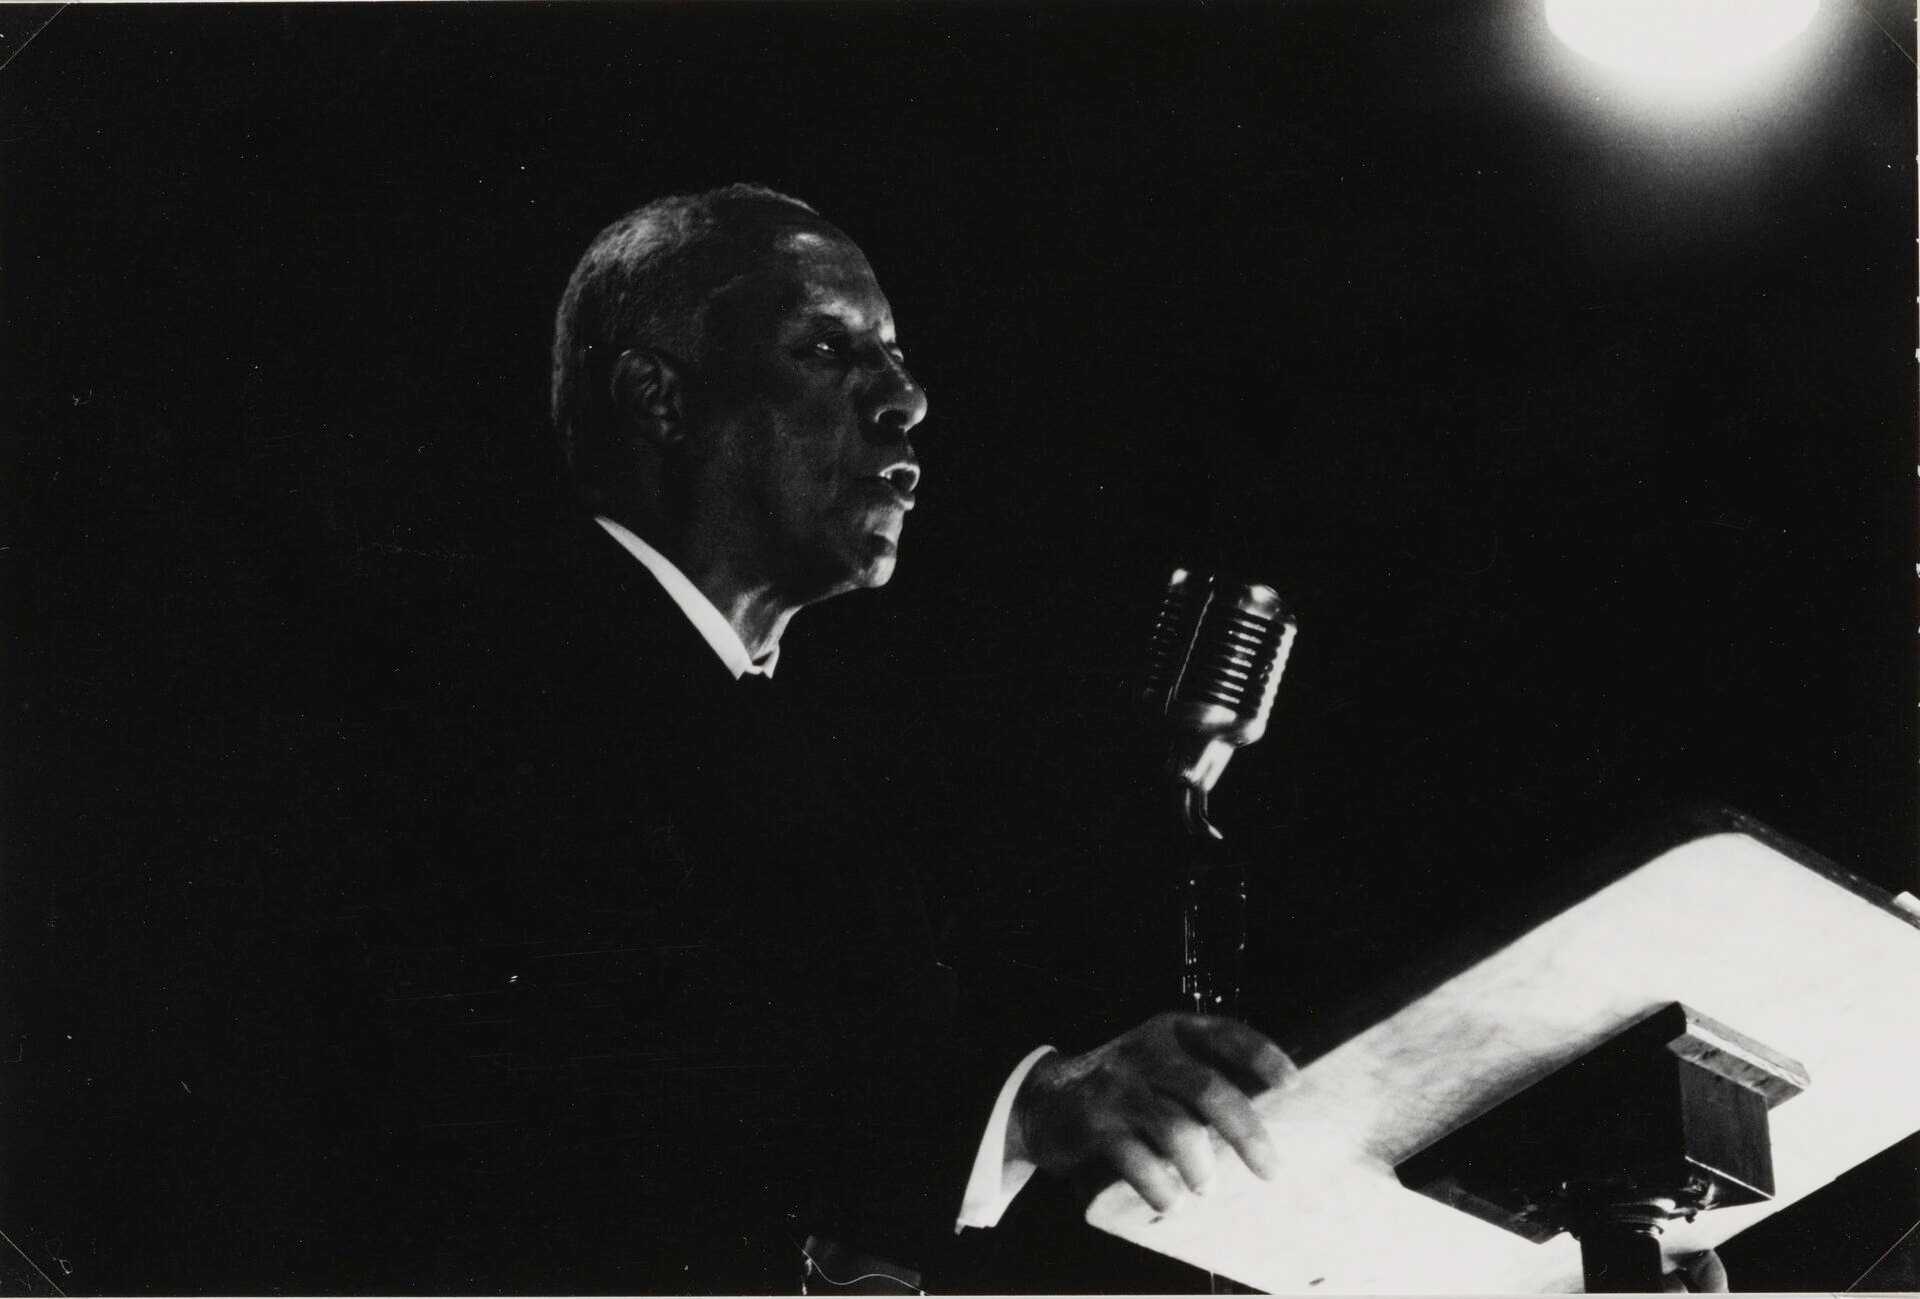 A silver gelatin print depicting a black-and-white image of A. Phillip Randolph giving a speech at an NAACP Convention in Albany, New York. The background is black with a single light illuminating from the upper right corner. Randolph is at the center, dressed in a black suit with a white dress shirt. He is standing in front of a microphone and podium. His proper right hand holds the edge of the podium and he is speaking into the microphone.

There are two inscriptions on the front of the print identifying the subject and the photographer's signature.  On the back of the print is a vertical line made with pencil.